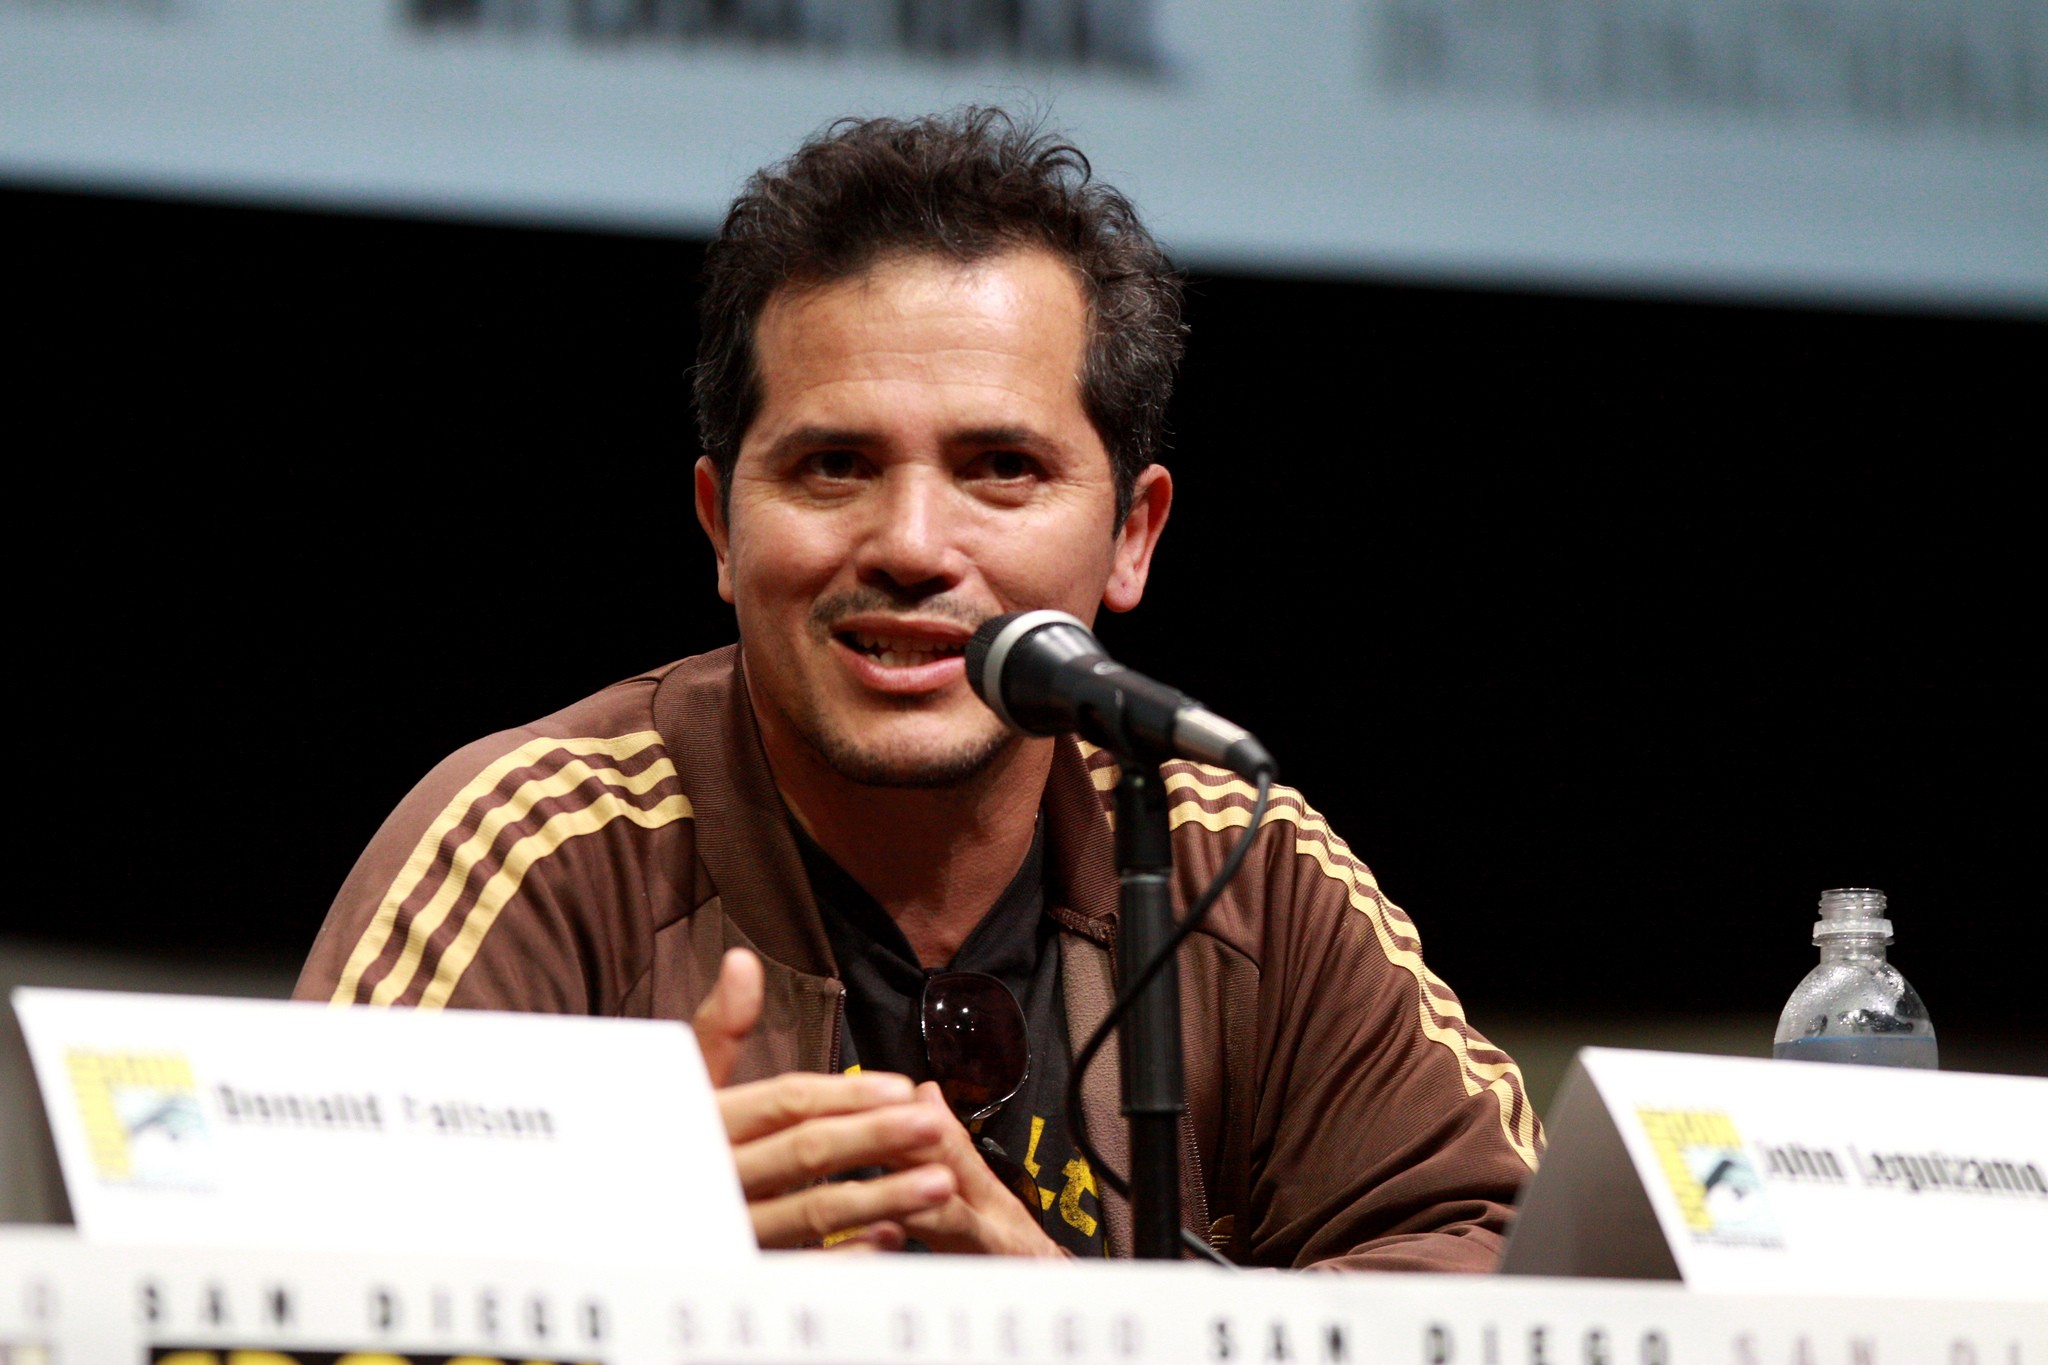 John Leguizamo, his chess movie on hold, is still two steps ahead